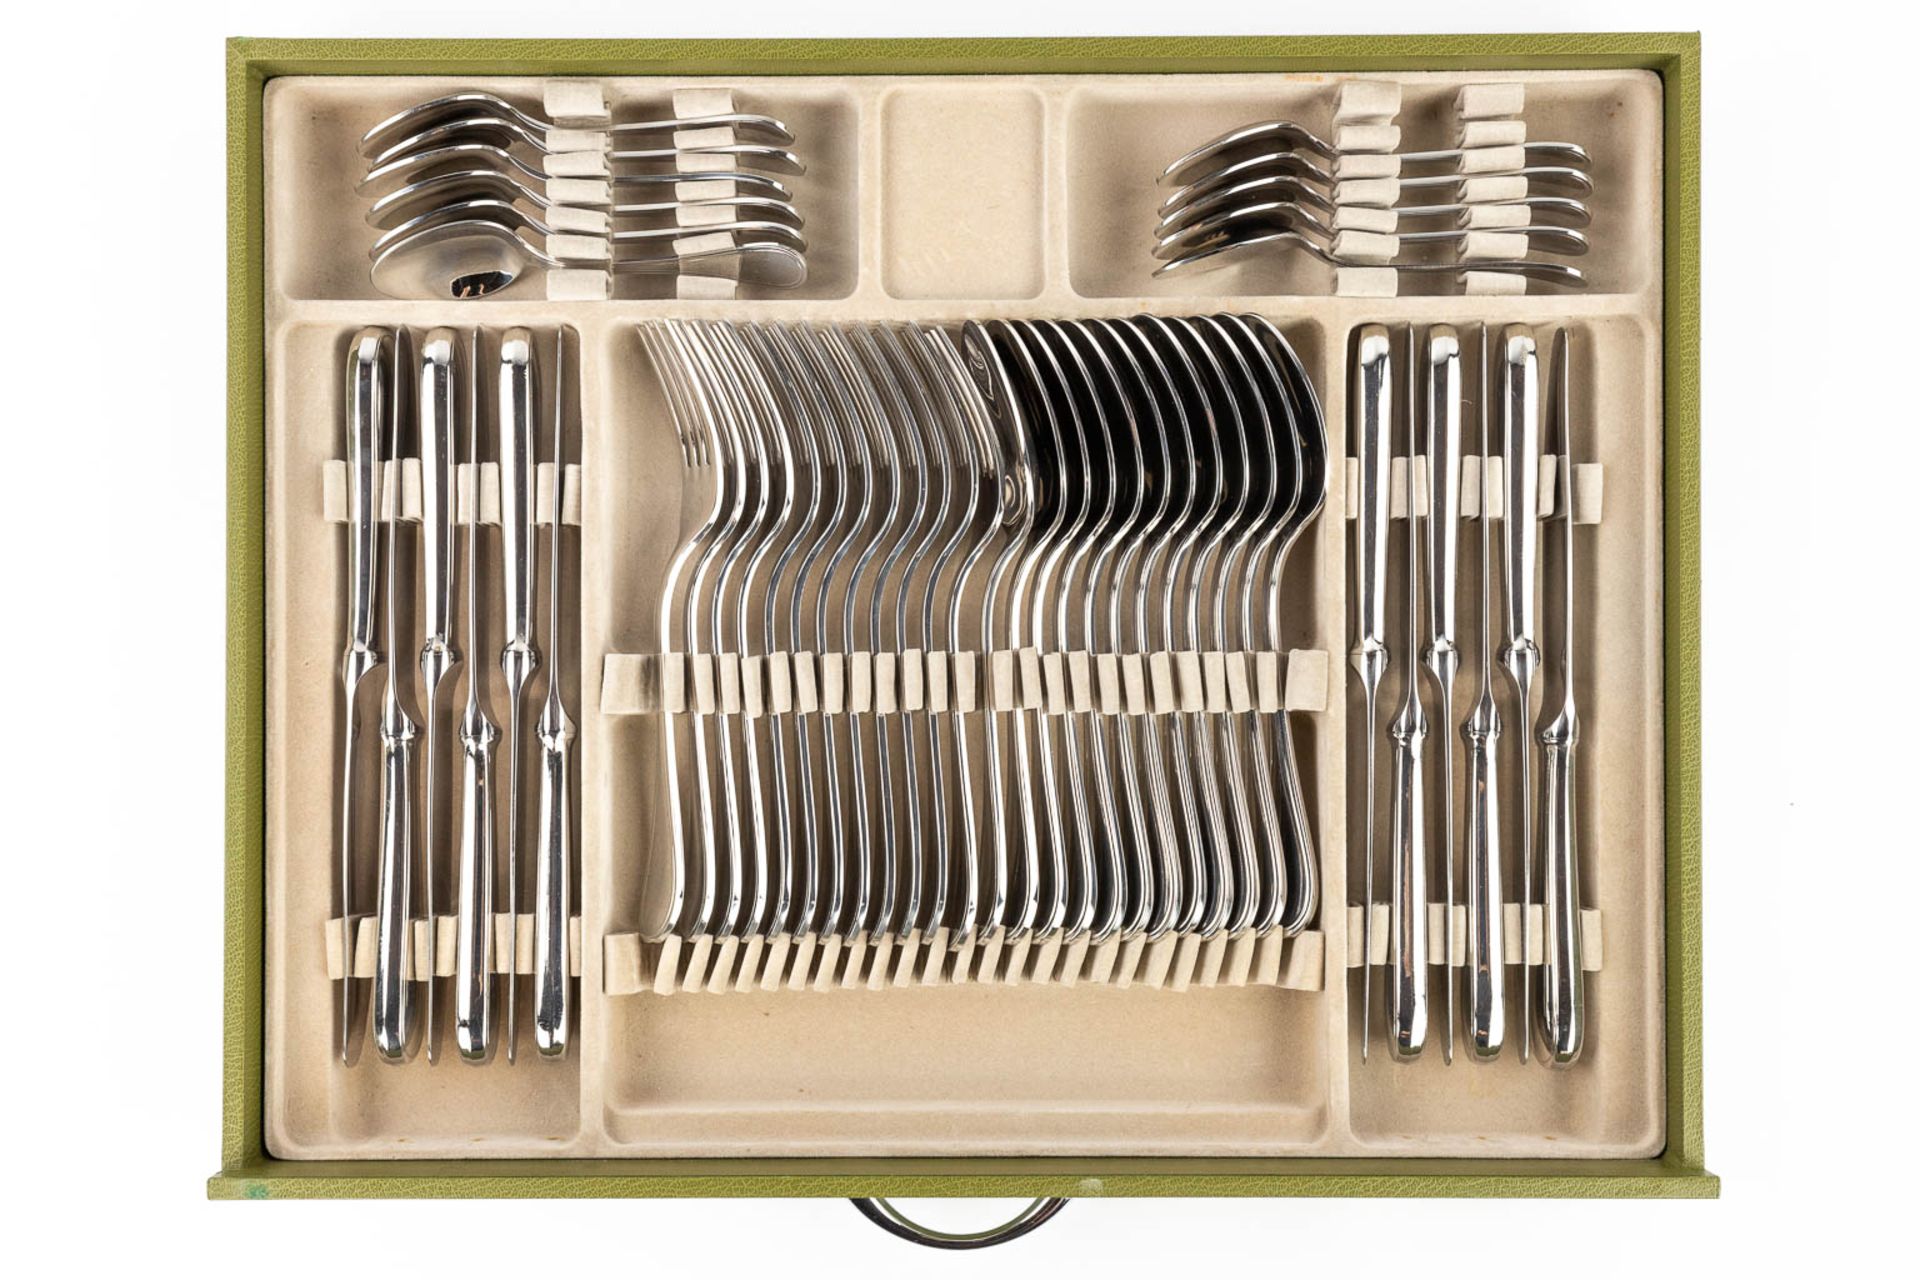 Christofle, model 'Albi' in an 'ambassador 125' case, a 124-piece flatware set, stainless steel. (L - Image 11 of 12